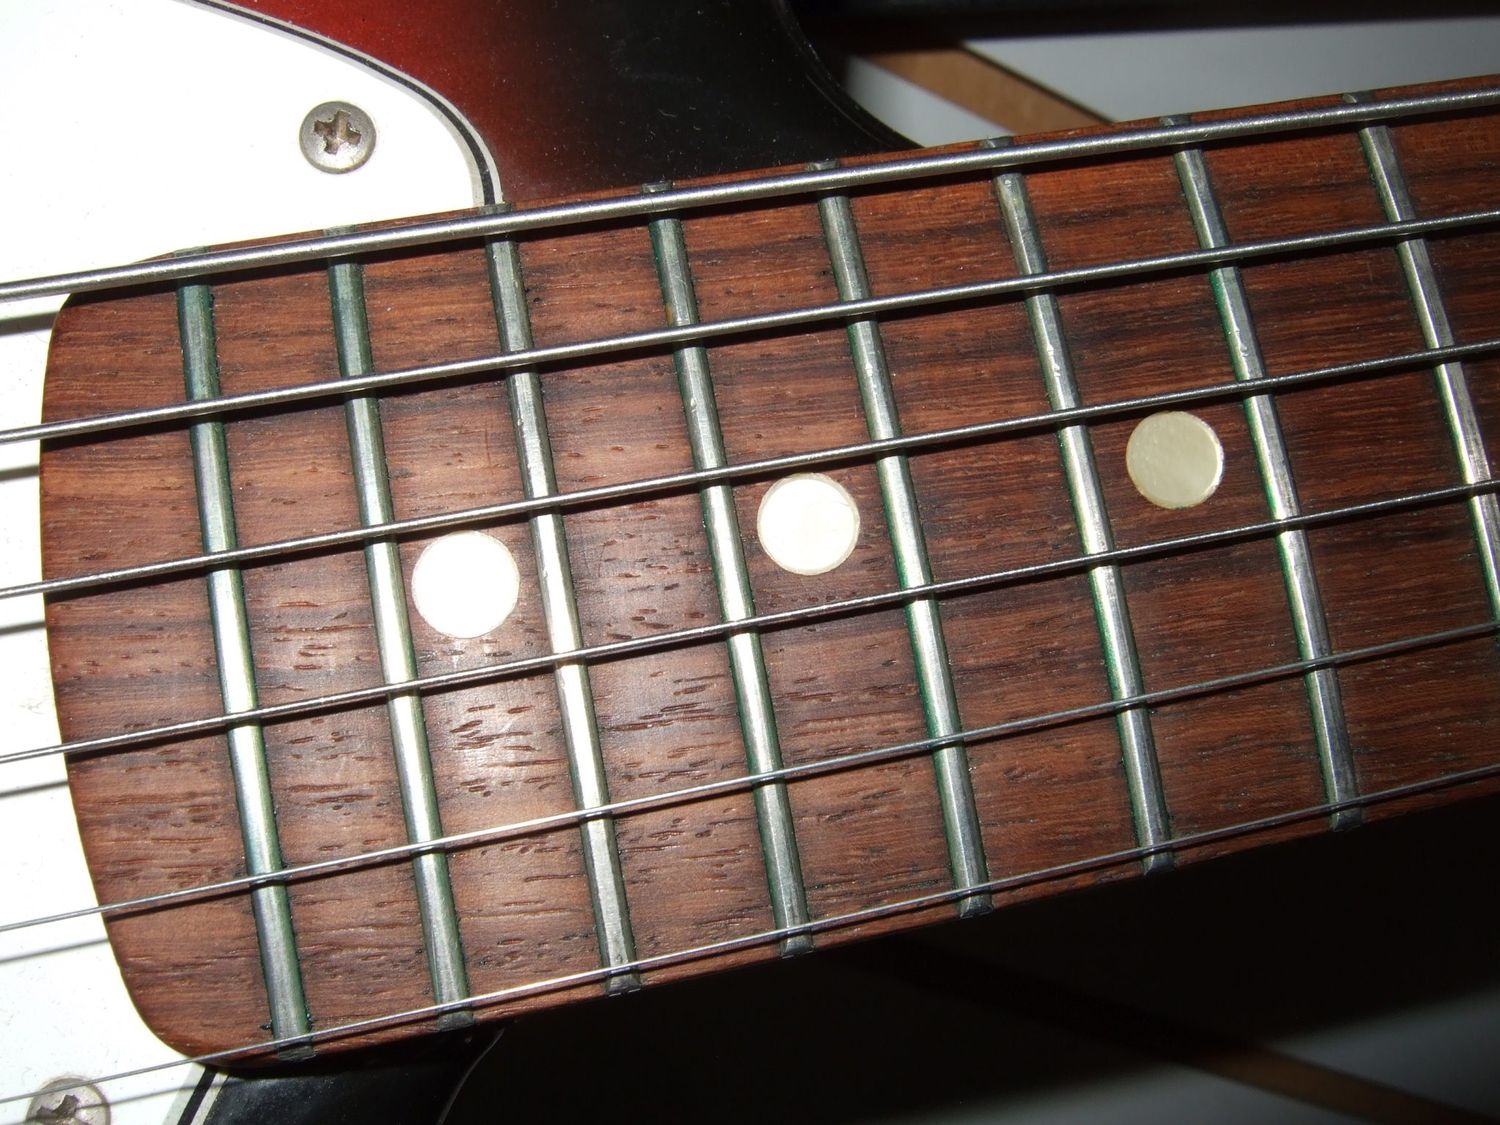 How To Fix A Dead Fret On An Acoustic Guitar